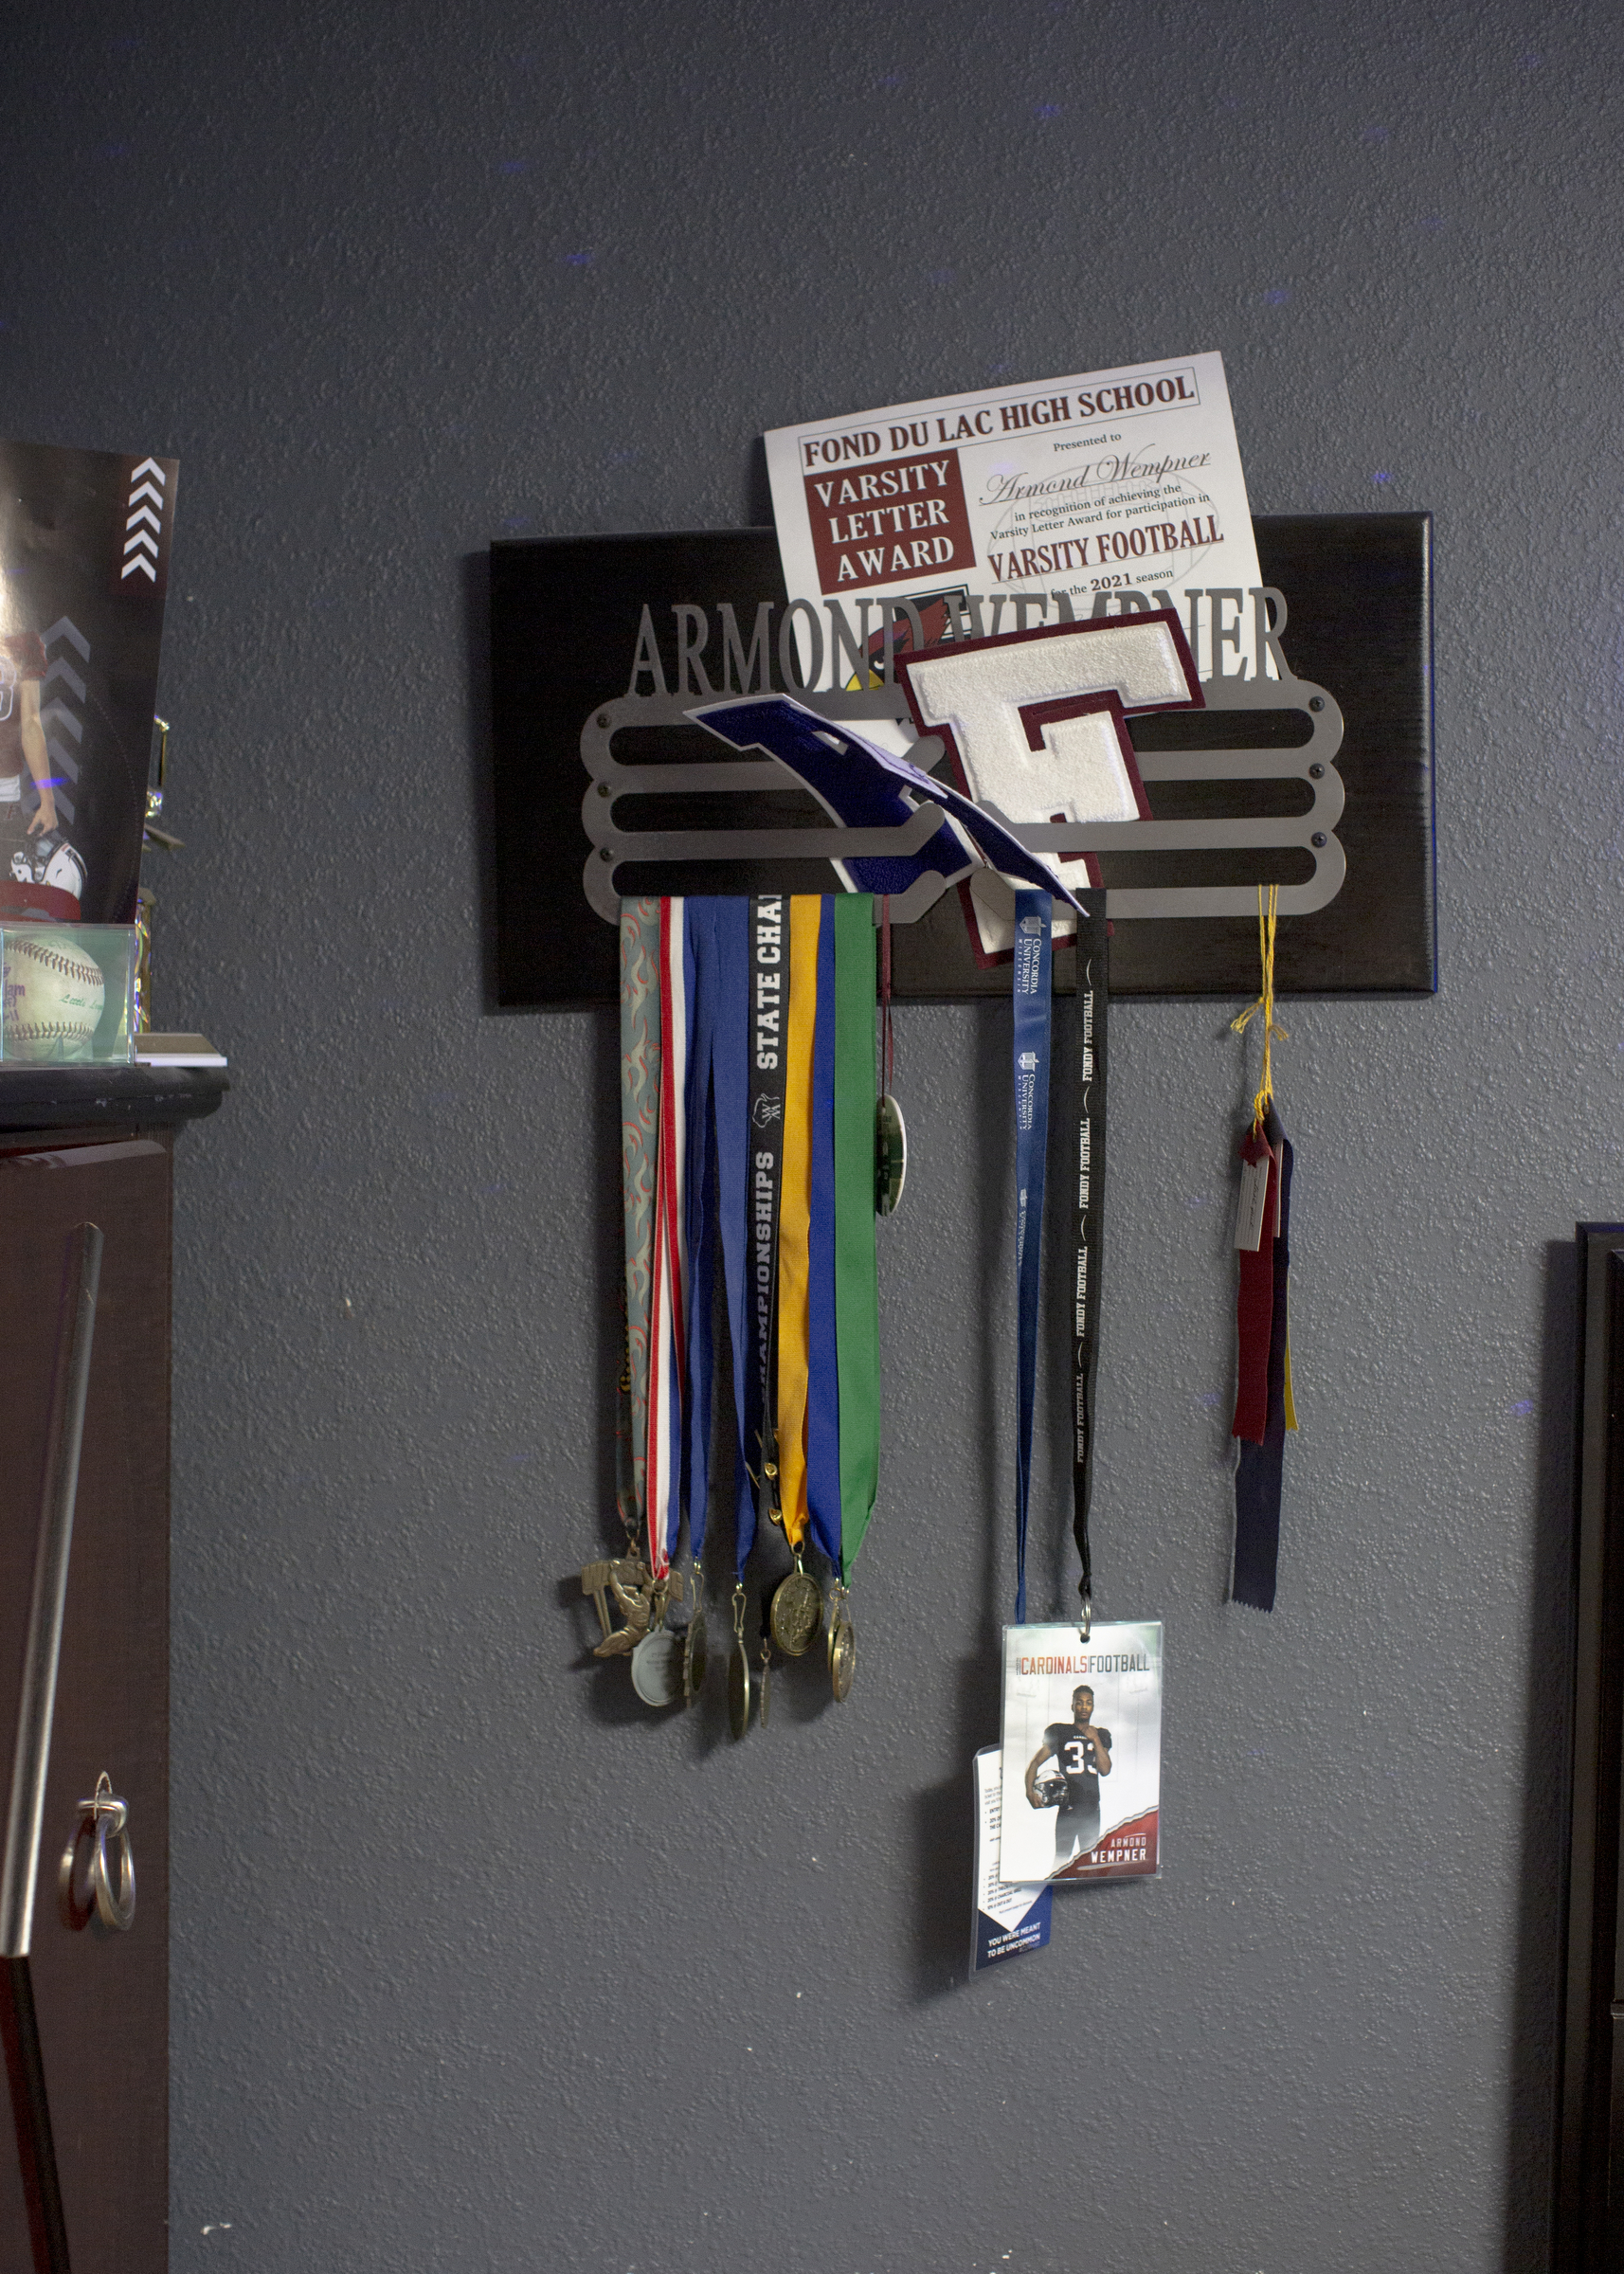 Armond Wempner’s athletic awards and mementos are shown on a wall of his parents’ home outside of Kiel, Wis.